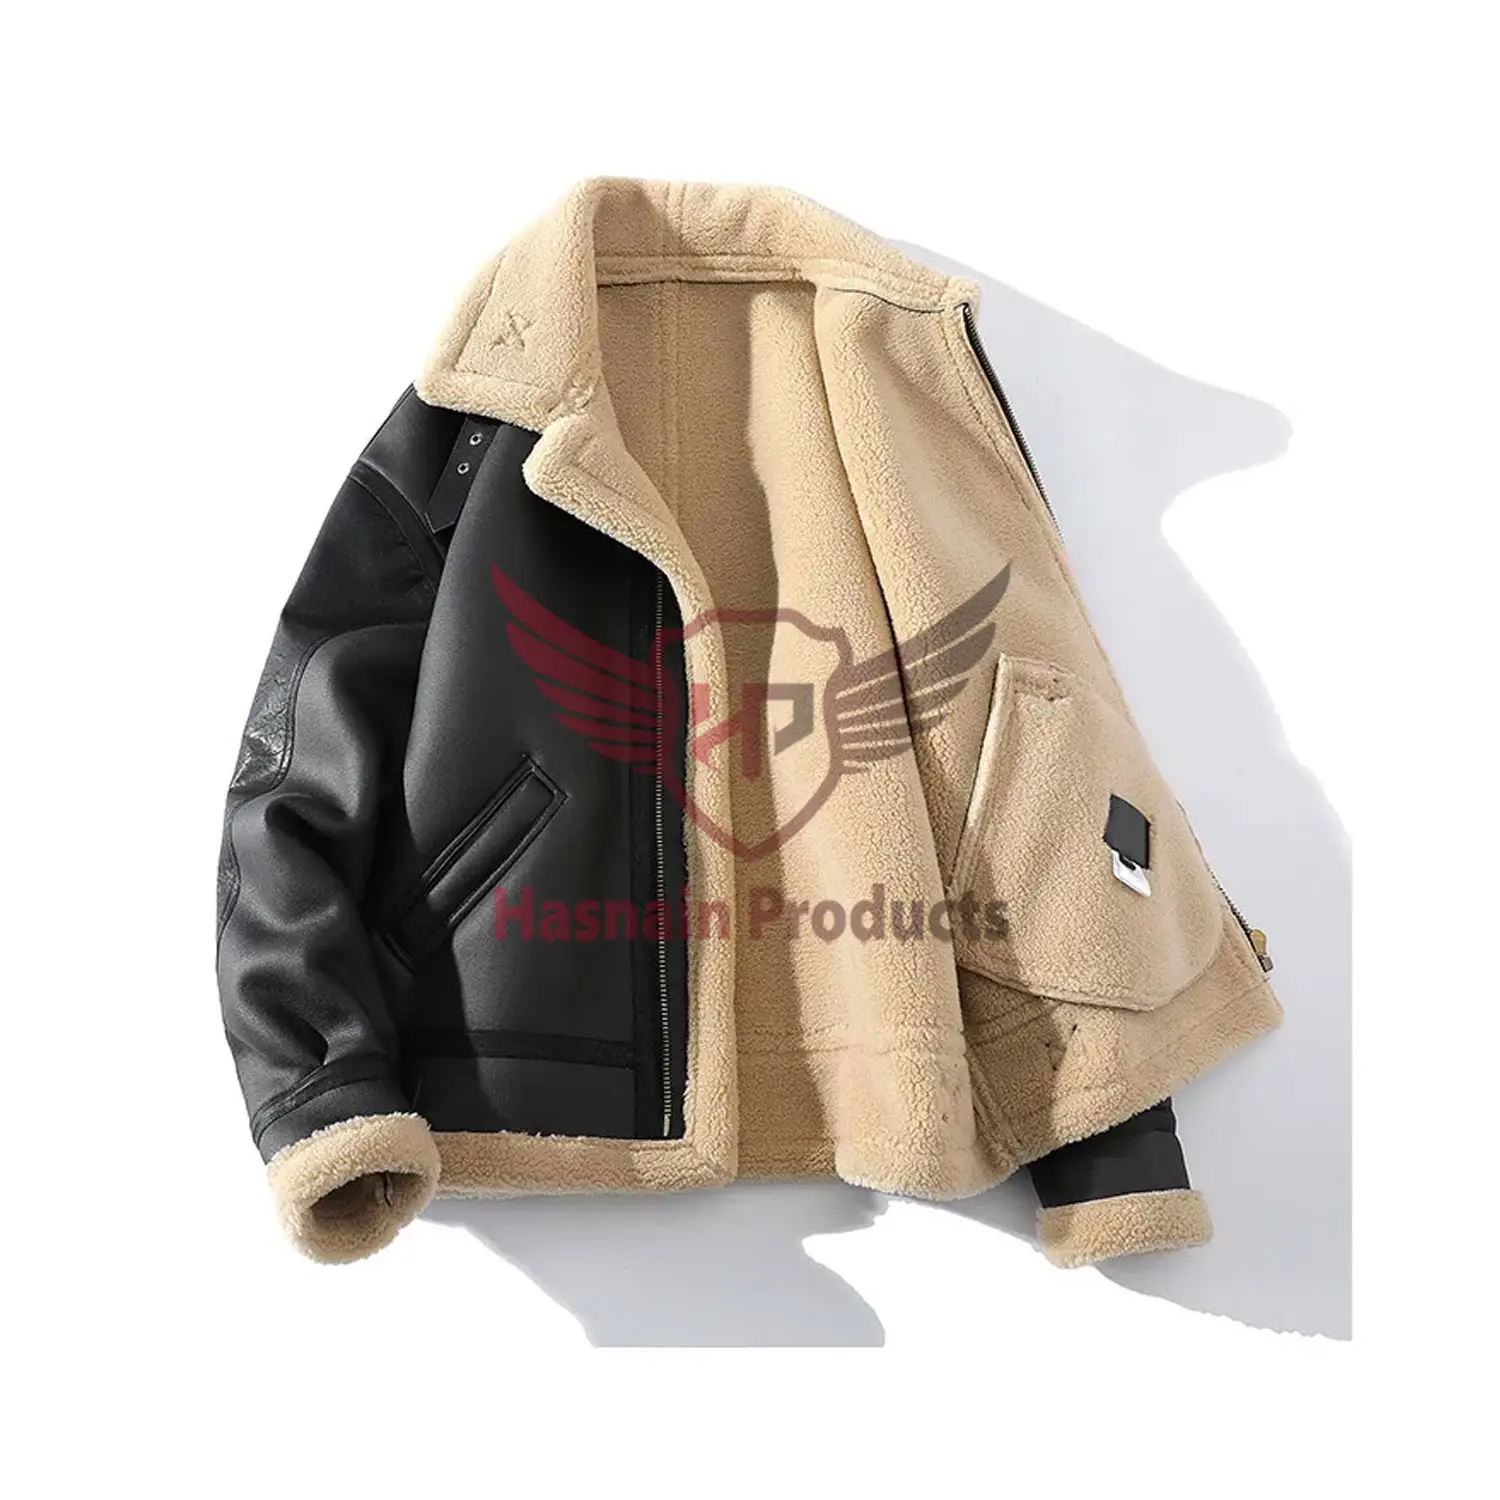 Premium Faux Fur Winter Coats for Men: Stylish Leather Bomber Jackets with Warmth, Soft Suede, Large Size, Thick PU